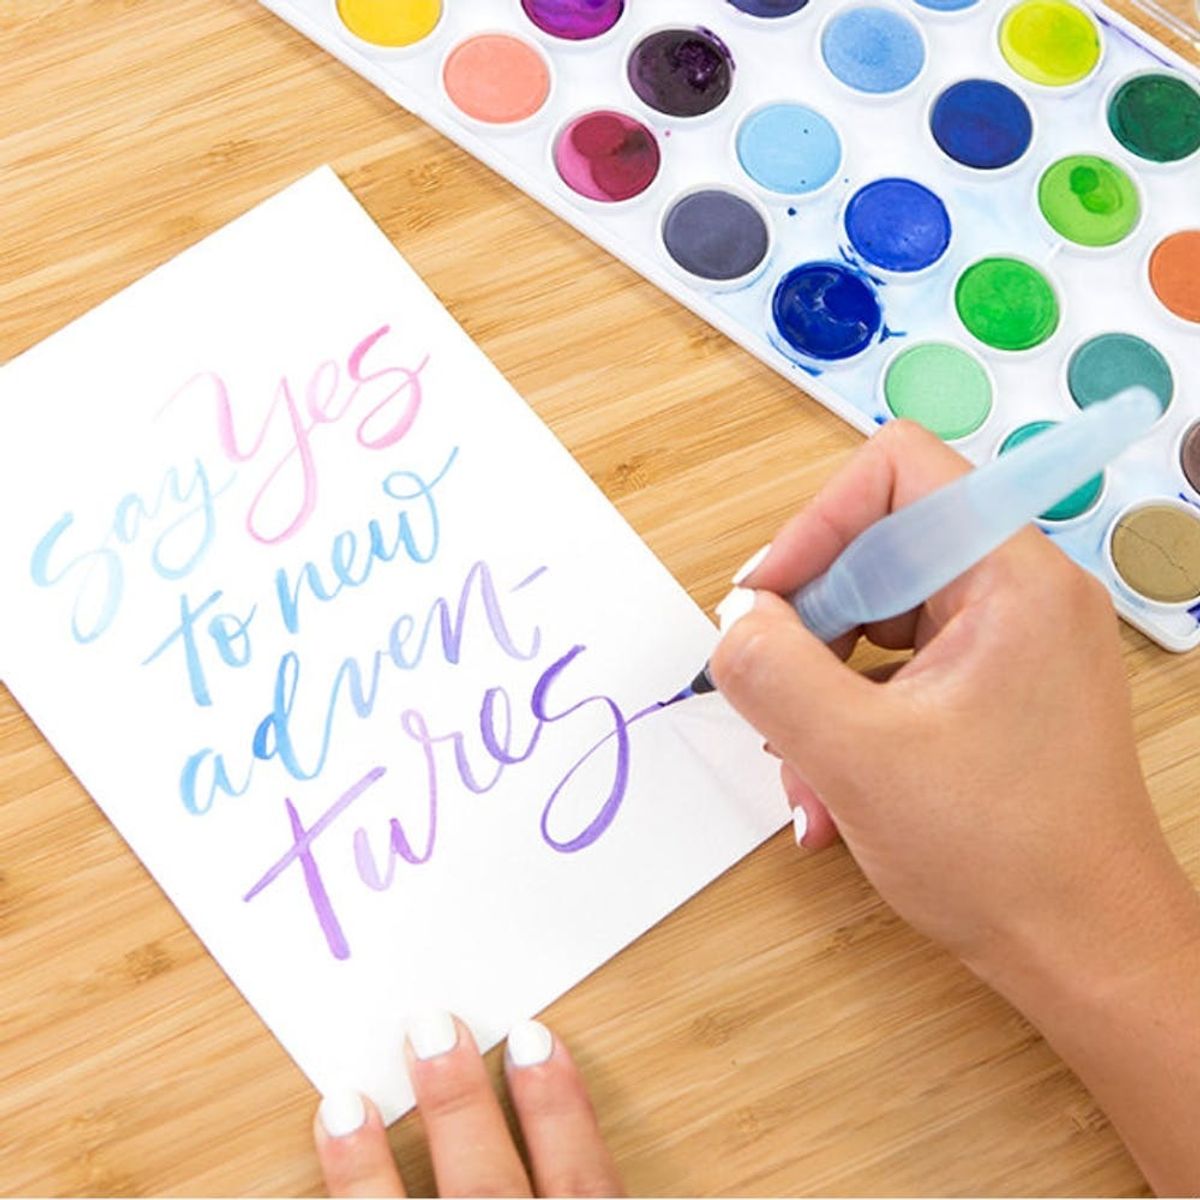 5 Creative Hobbies You Can Pick Up Super Quickly